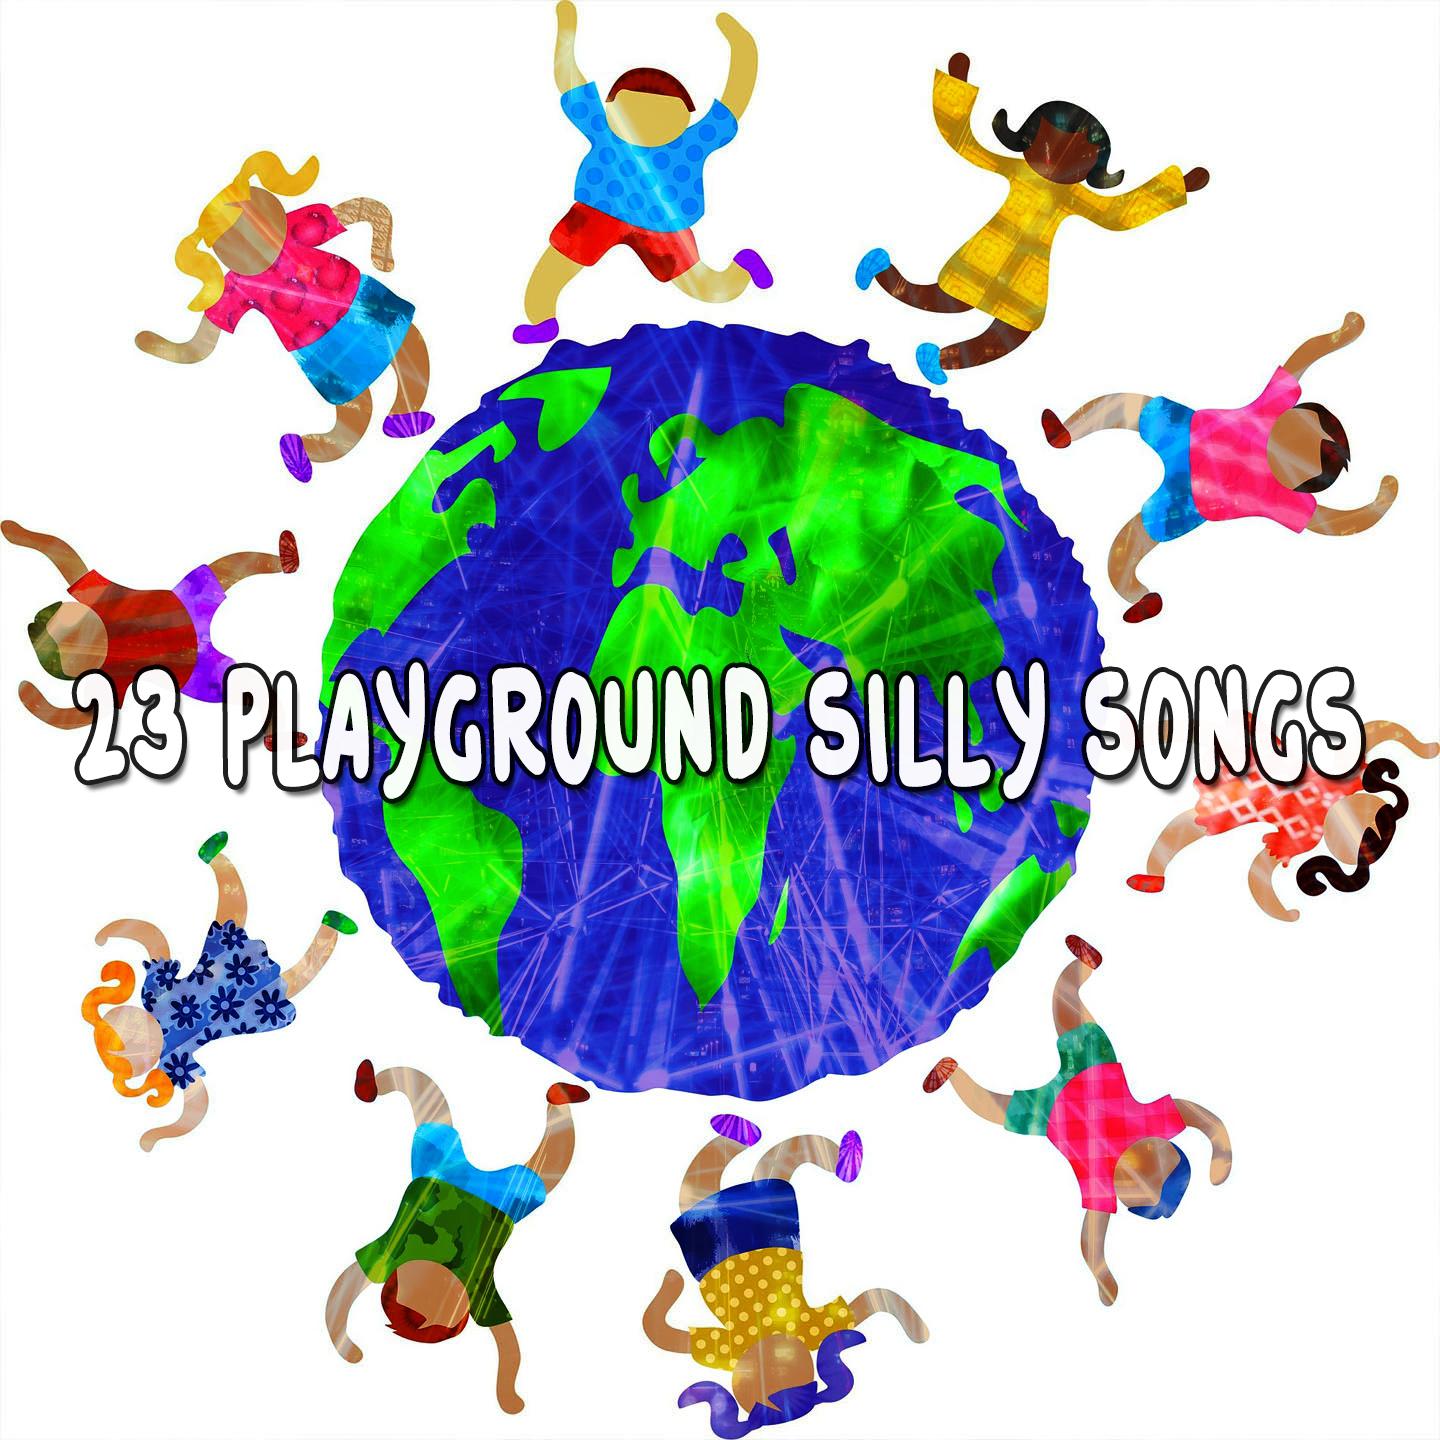 23 Playground Silly Songs